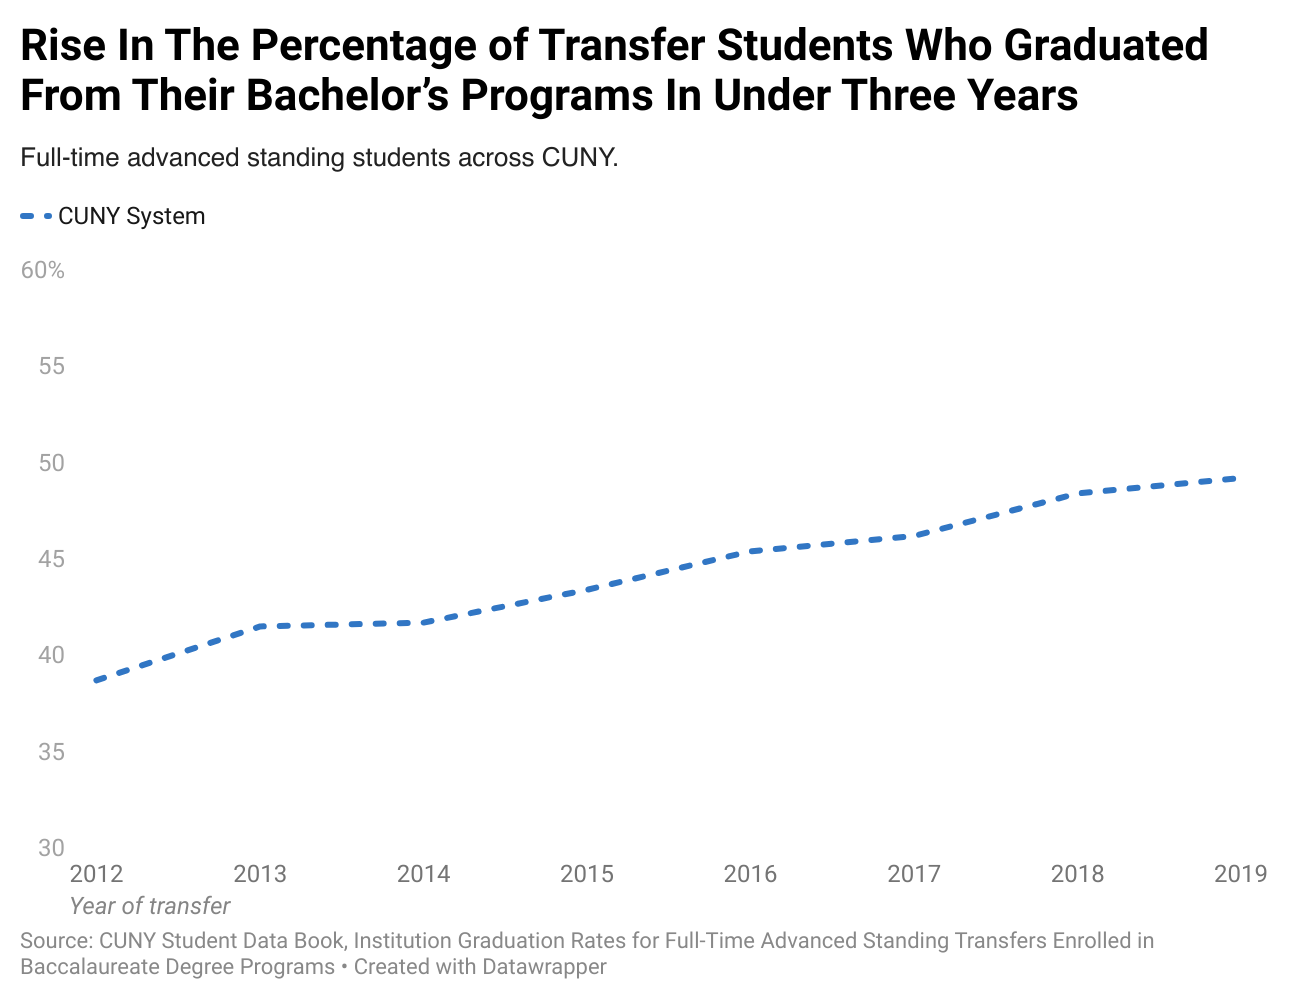 Line graph titled Rise In The Percentage of Transfer Students Who Graduated From Their Bachelor's Programs In Under Three Years. The subtitle reads, Full-time advanced standing students across CUNY. The line shows an upward trend from 2012 to 2019.